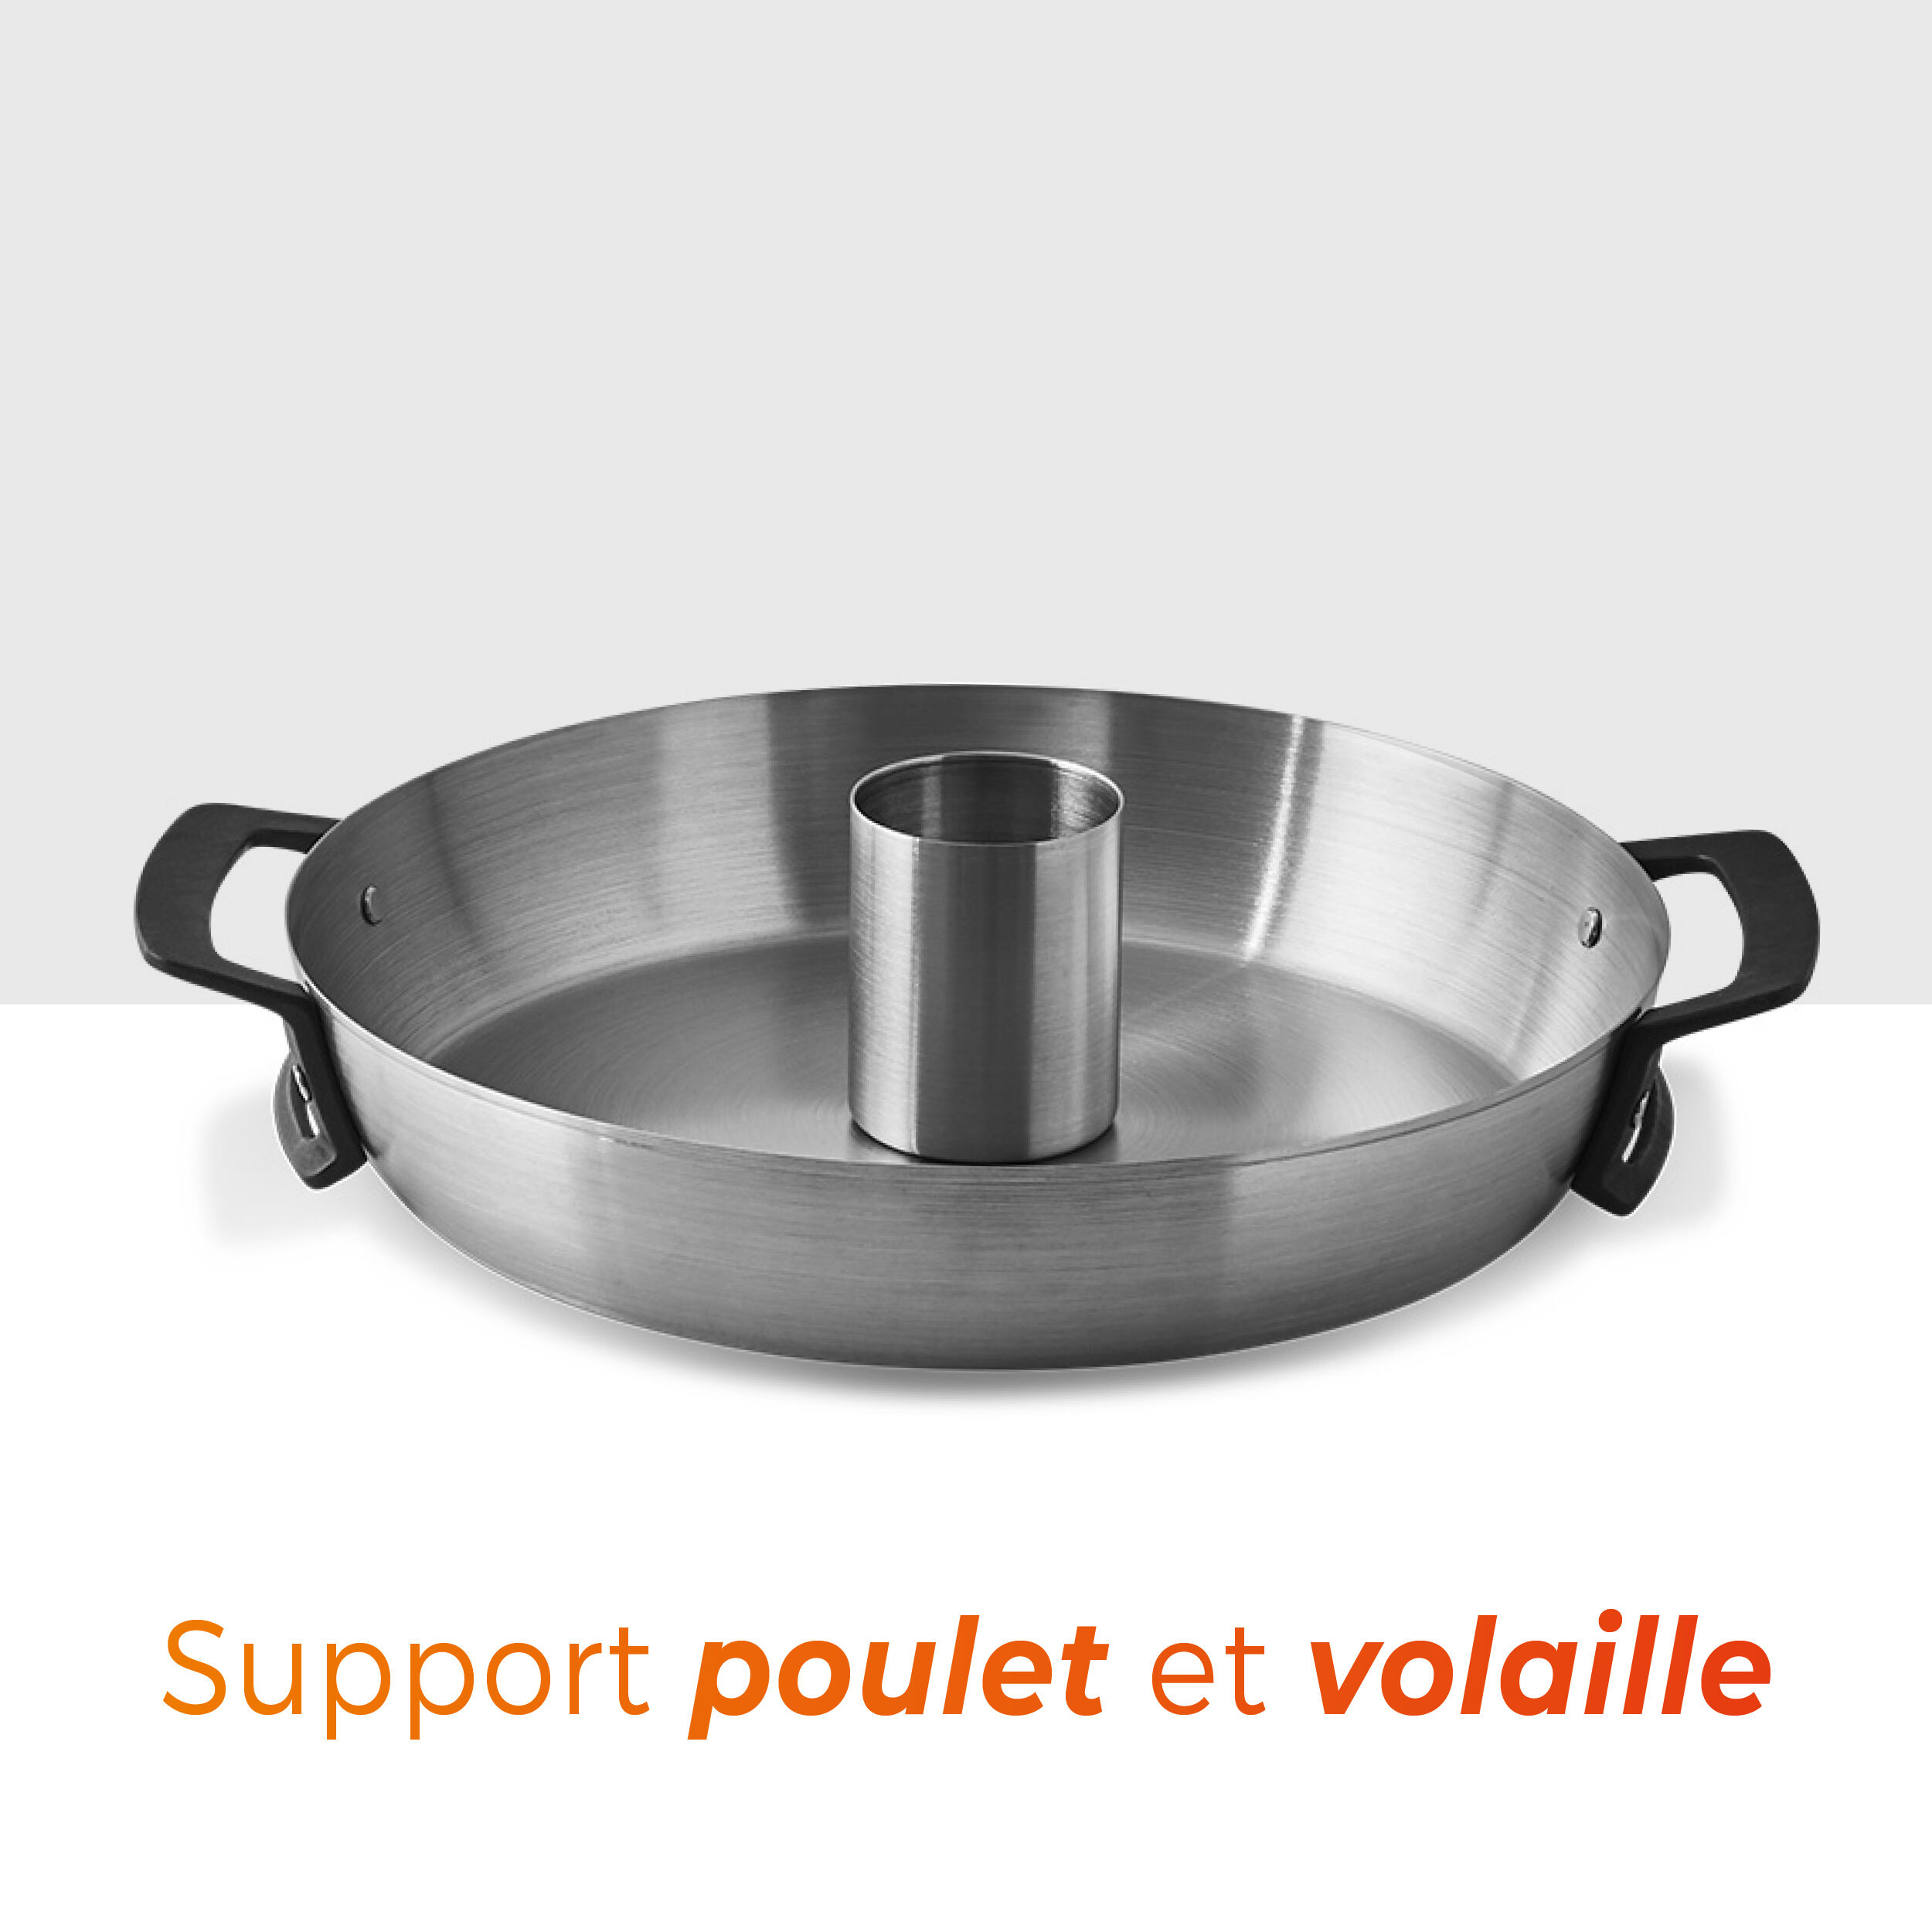 Support poulet volaille - BRASERO